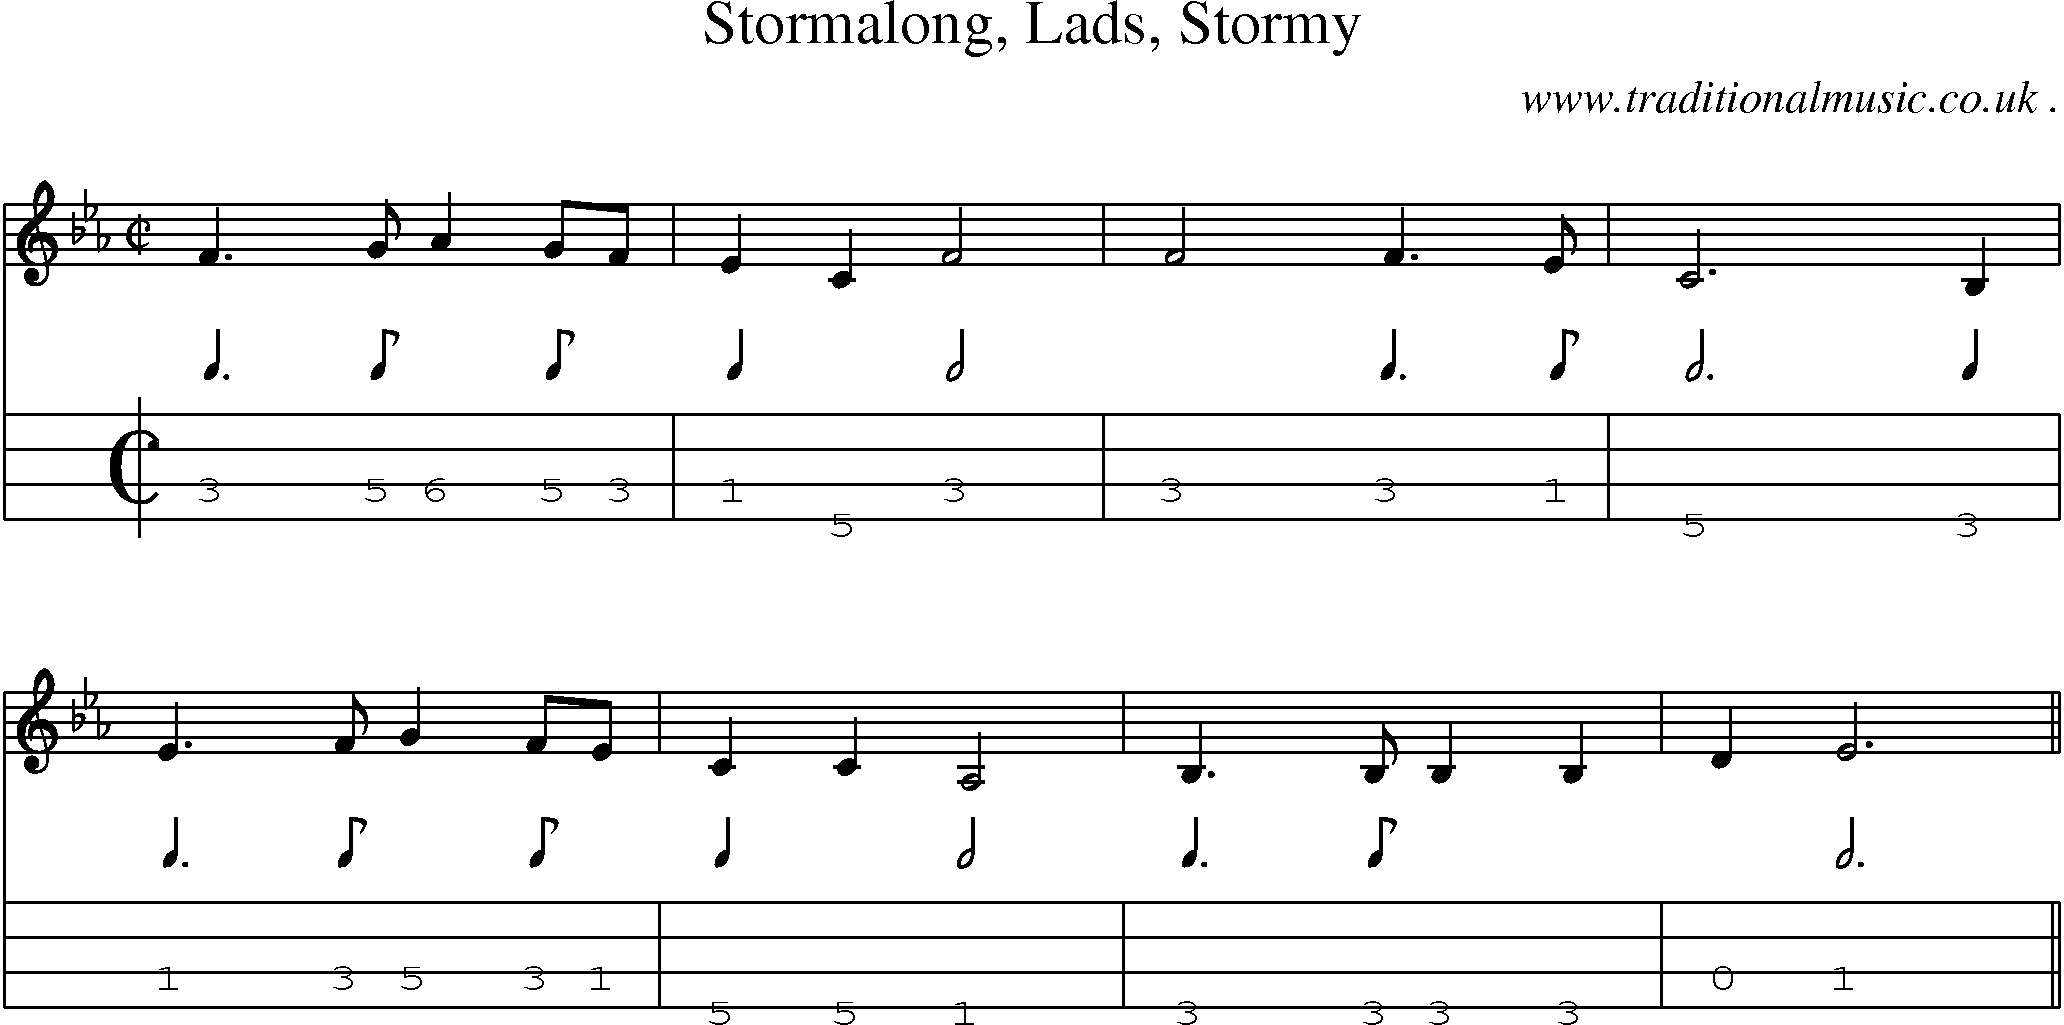 Sheet-Music and Mandolin Tabs for Stormalong Lads Stormy